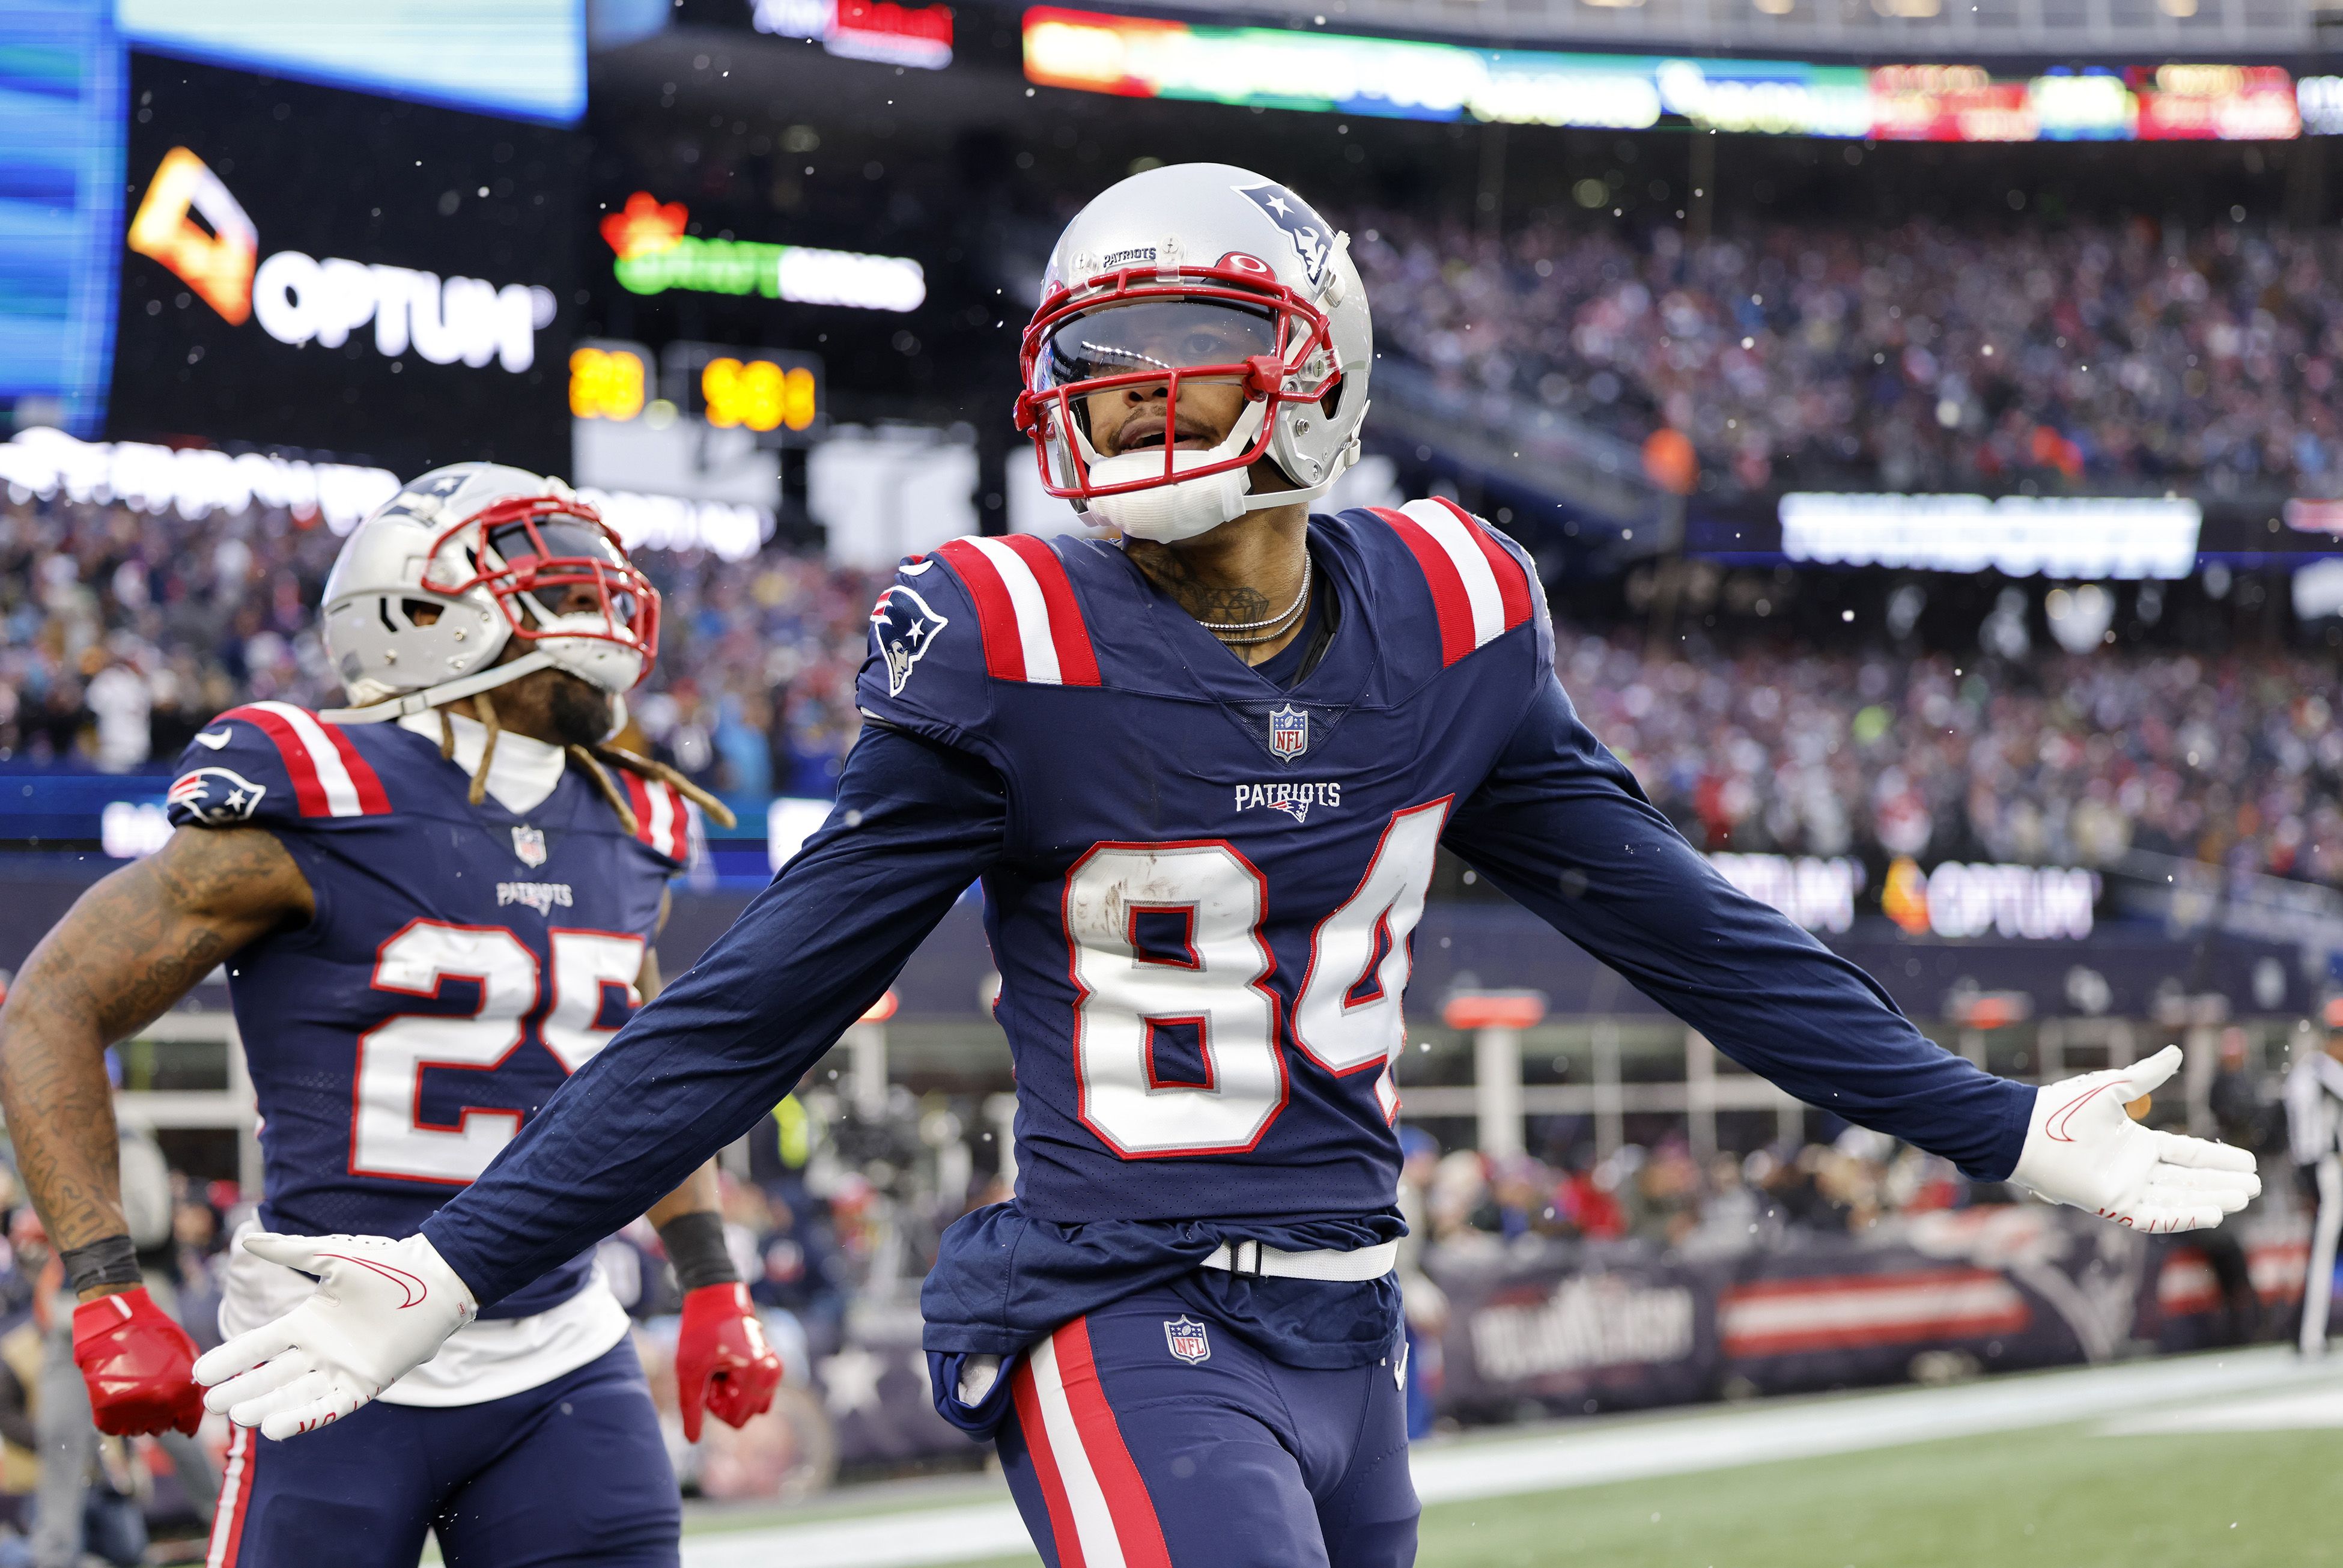 NFL: New England defense bullies Tennessee in 36-13 victory for